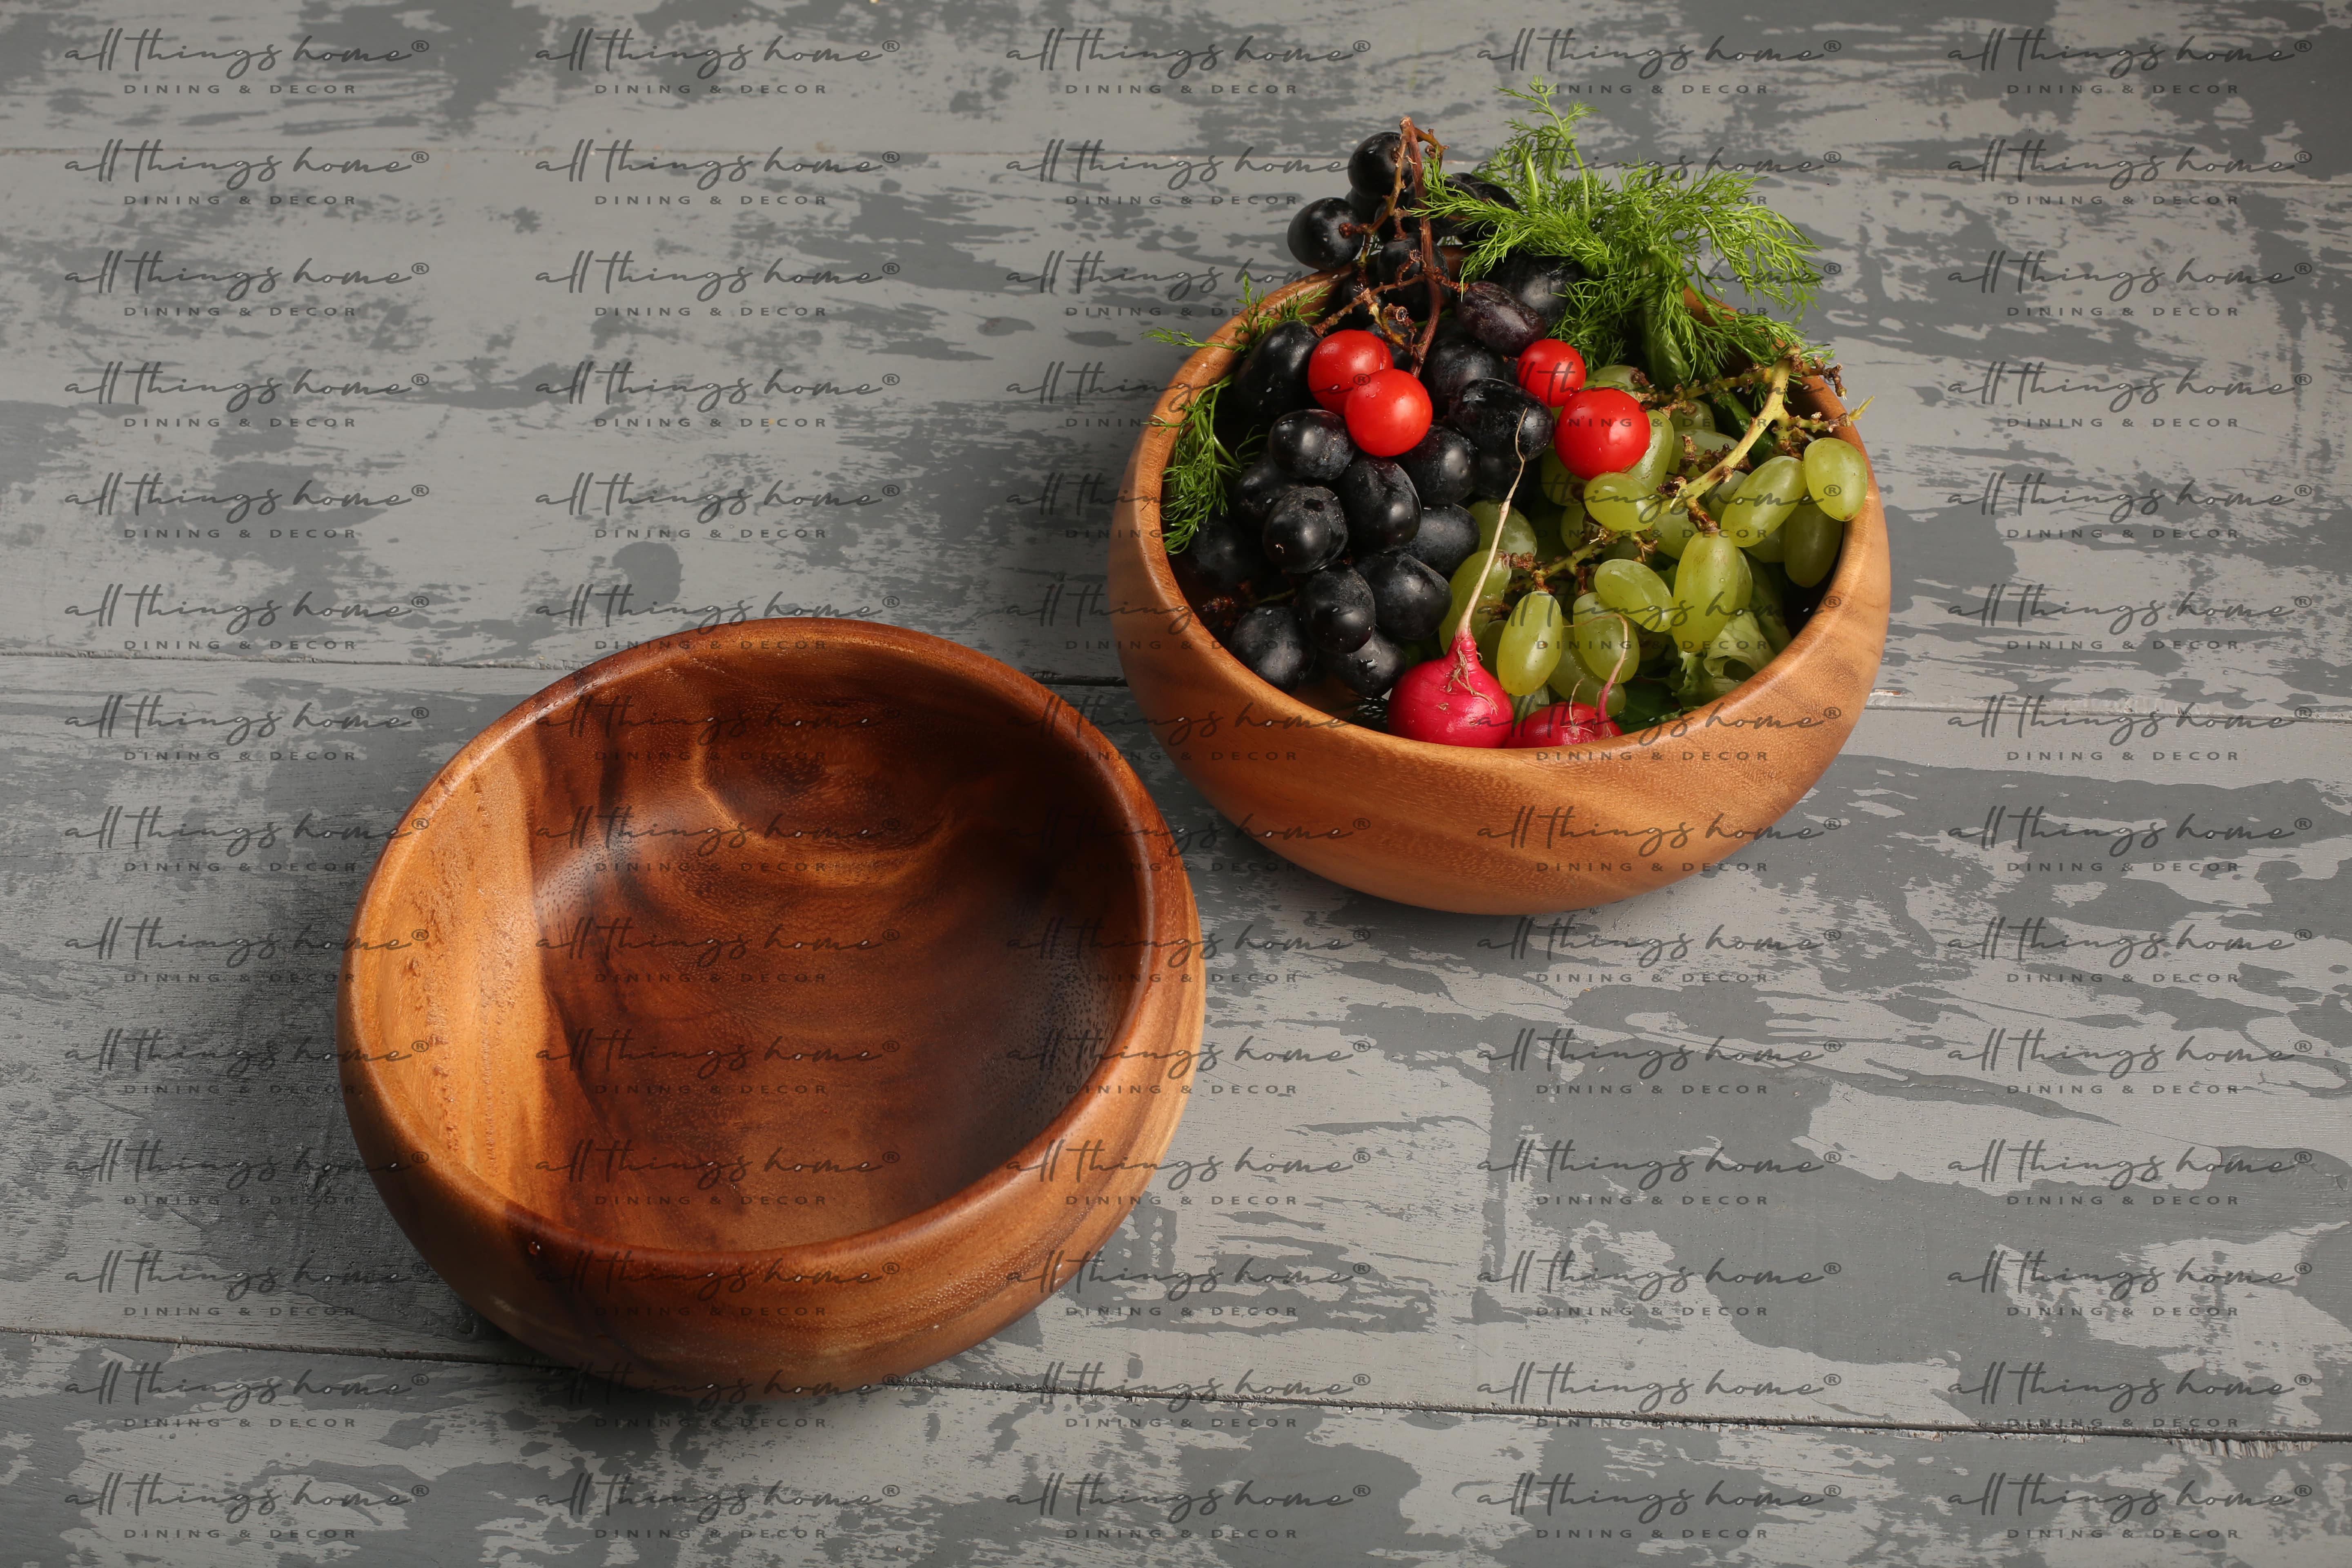 Wooden Round Bowl | All Things HomeHome and LifestyleHome Decor - FurnishingsCentral DelhiKarol Bagh